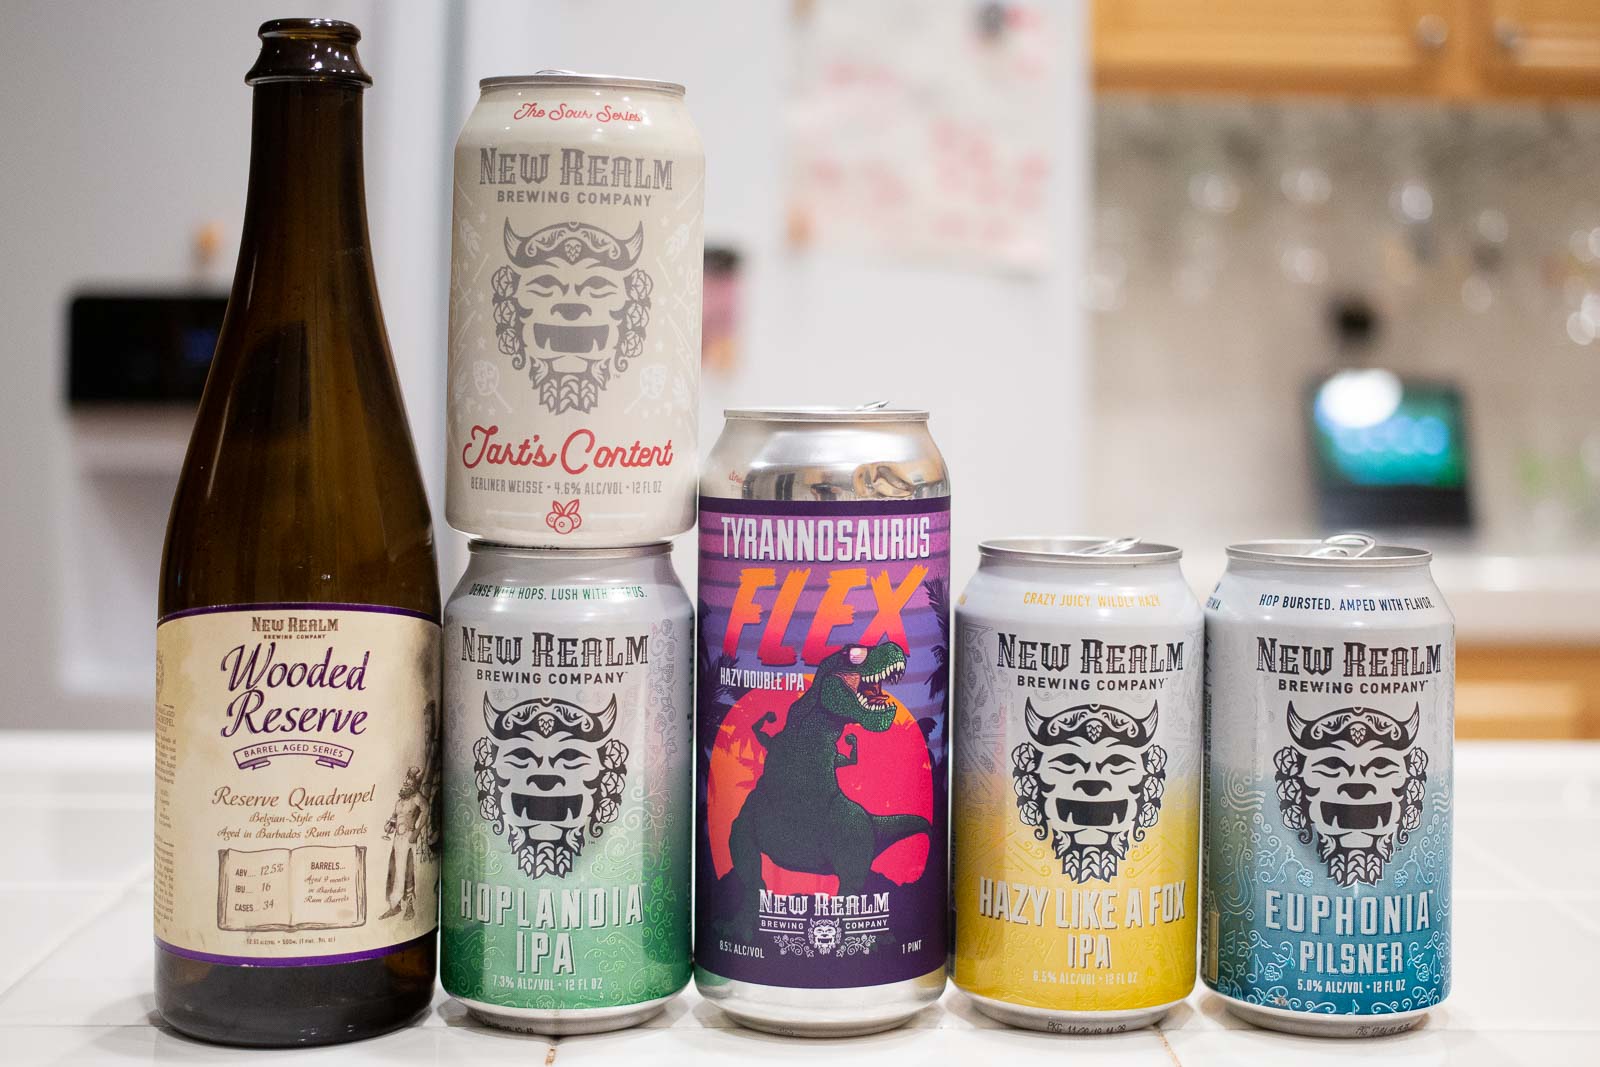 Pictured: Beers from New Realm Brewing Company by way of Phil Lorenzini.